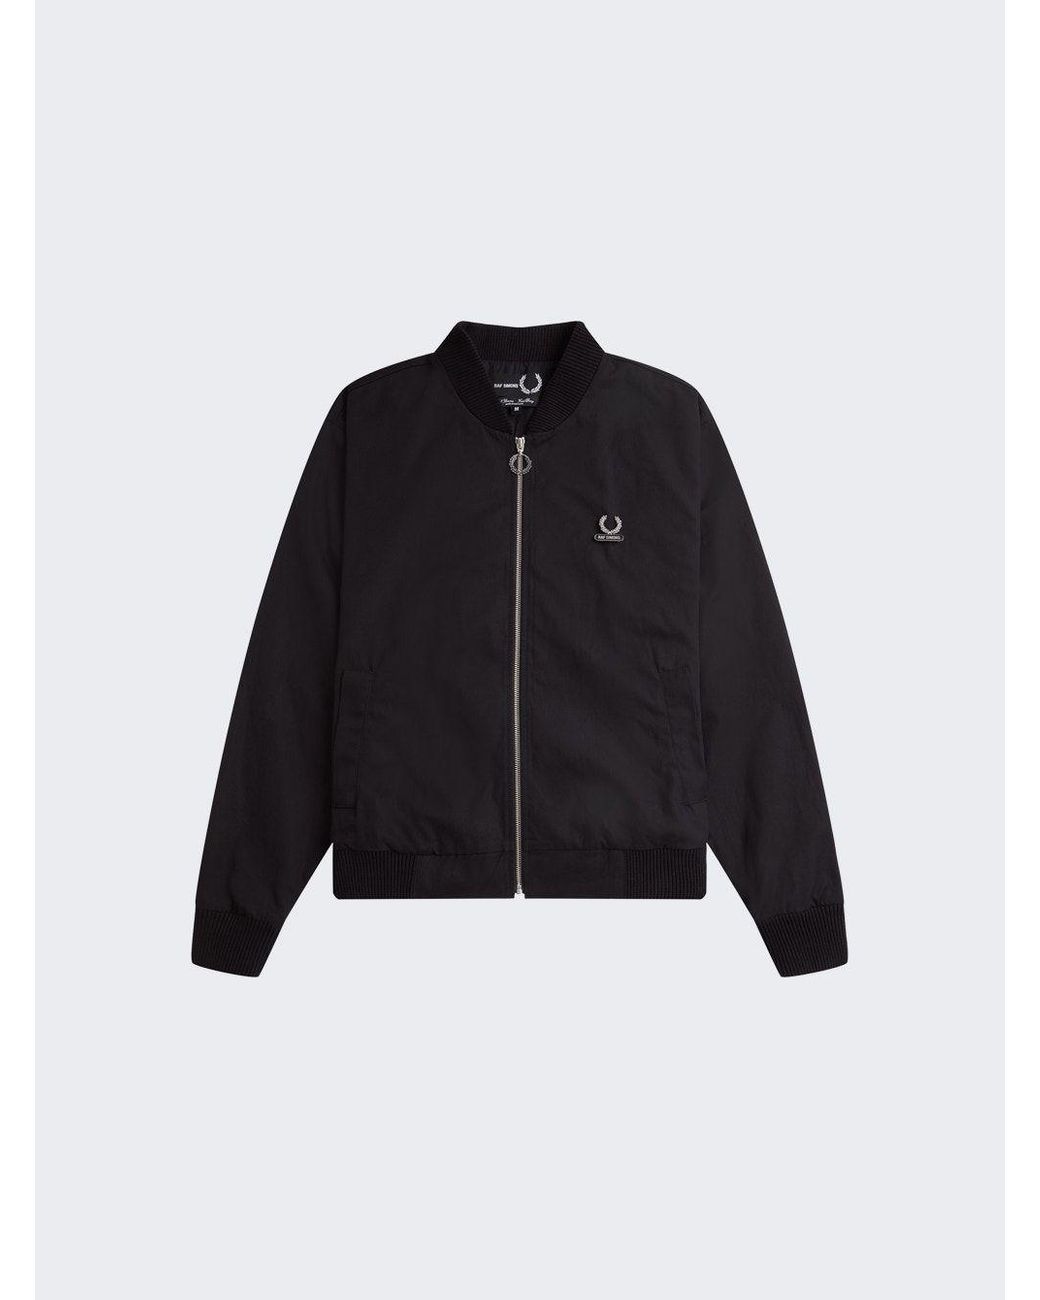 Fred Perry Printed Bomber Jacket in Black for Men | Lyst